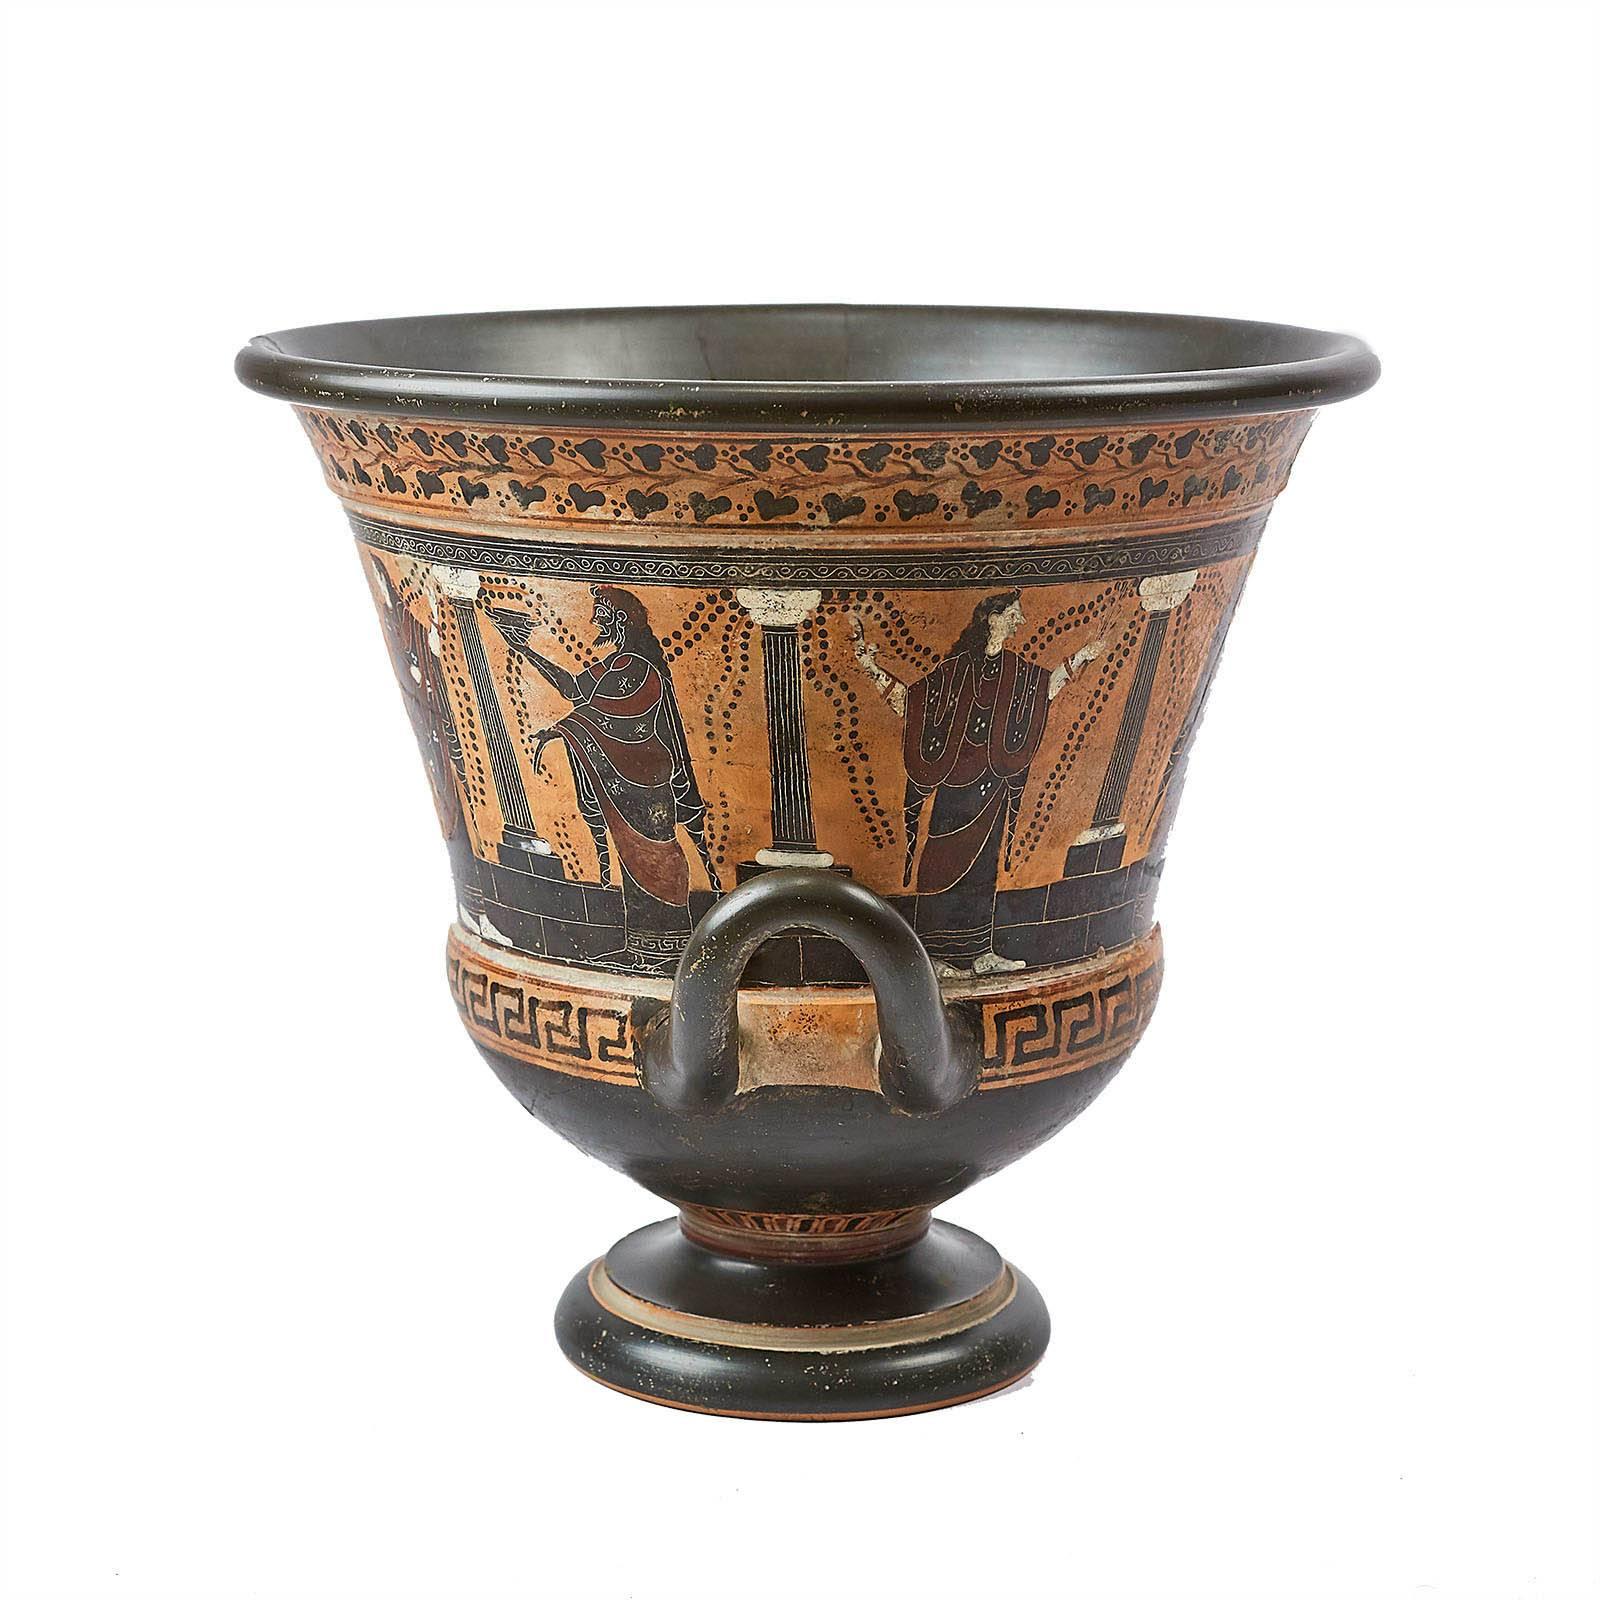 A very handsome and large archaic Greek style pottery krater or wine cistern. The style originates in pre-classical Greece about 600 BC. This elegant example was made early in the 19th century for sale to wealthy tourists. Painting and potting are